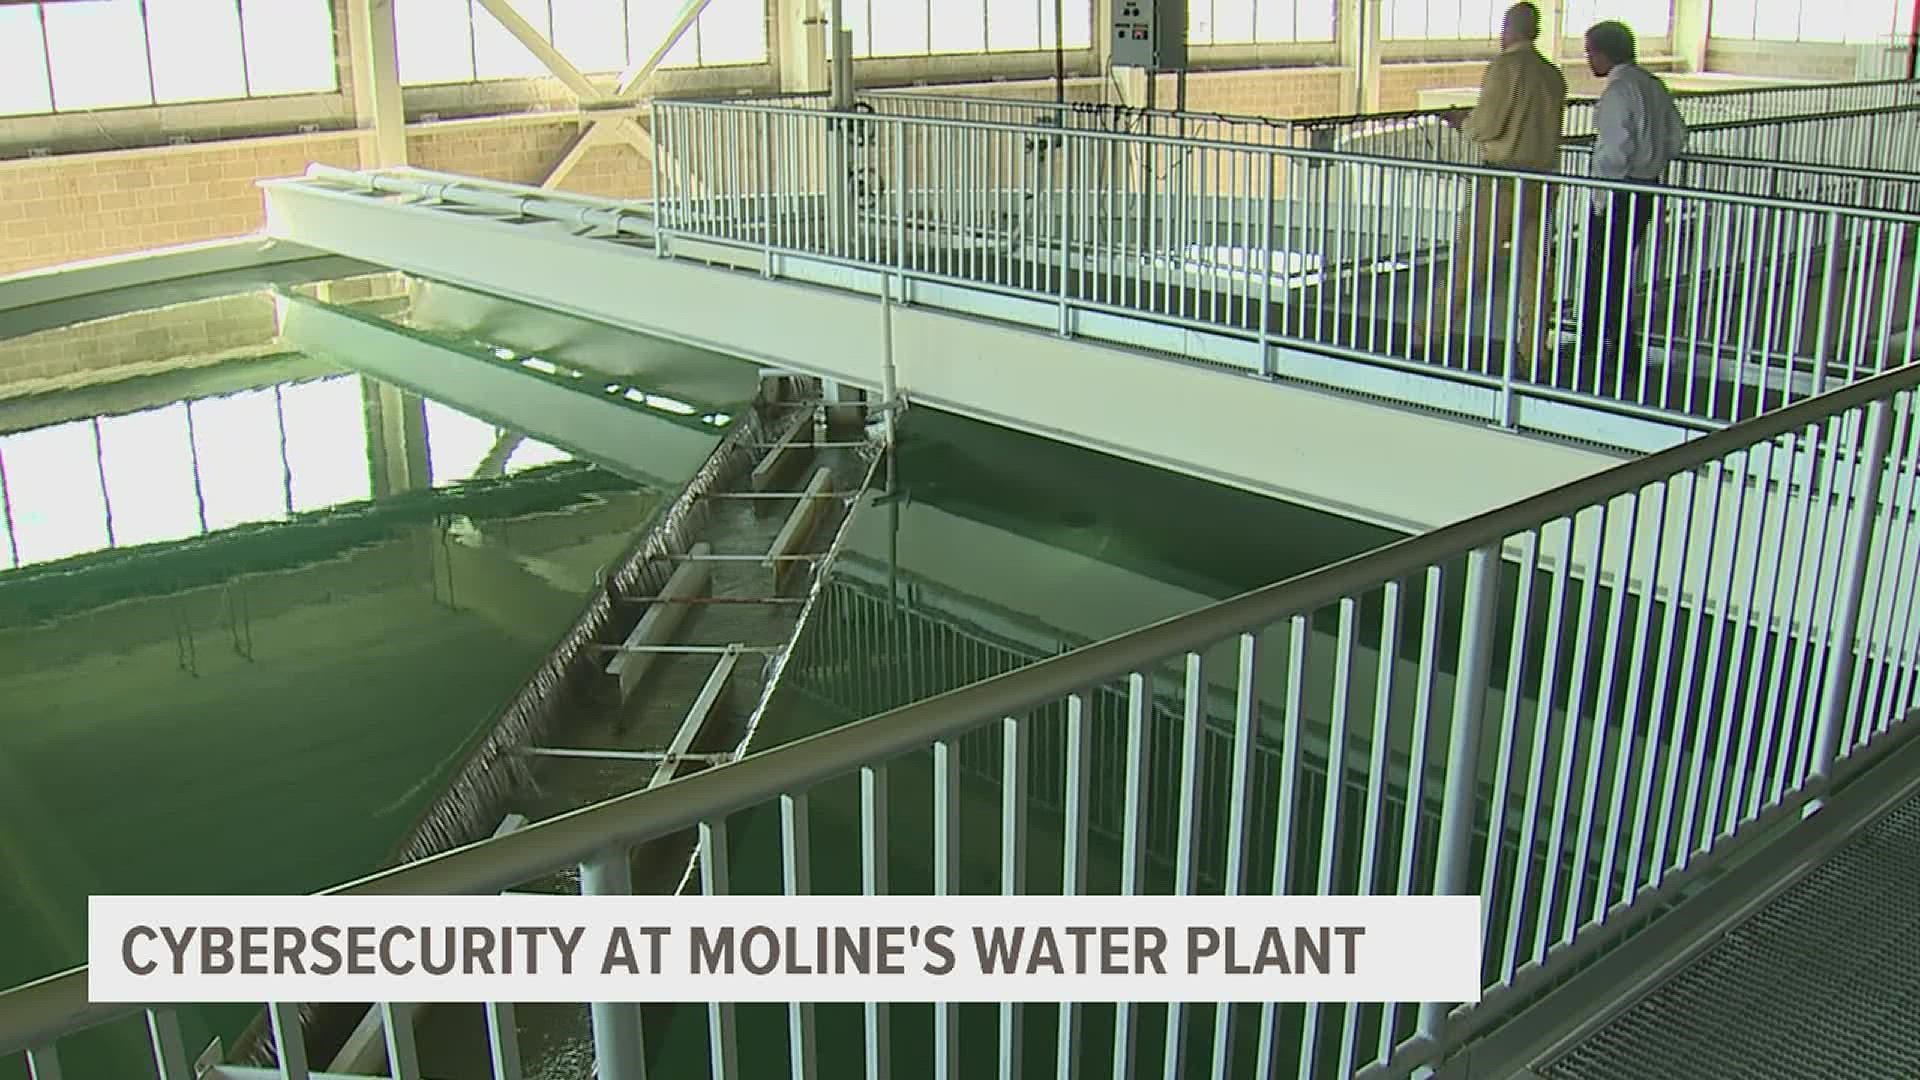 The Moline city council will hold a vote Tuesday Sept. 13 on the proposal to improve the Moline water treatment plant's computing software.